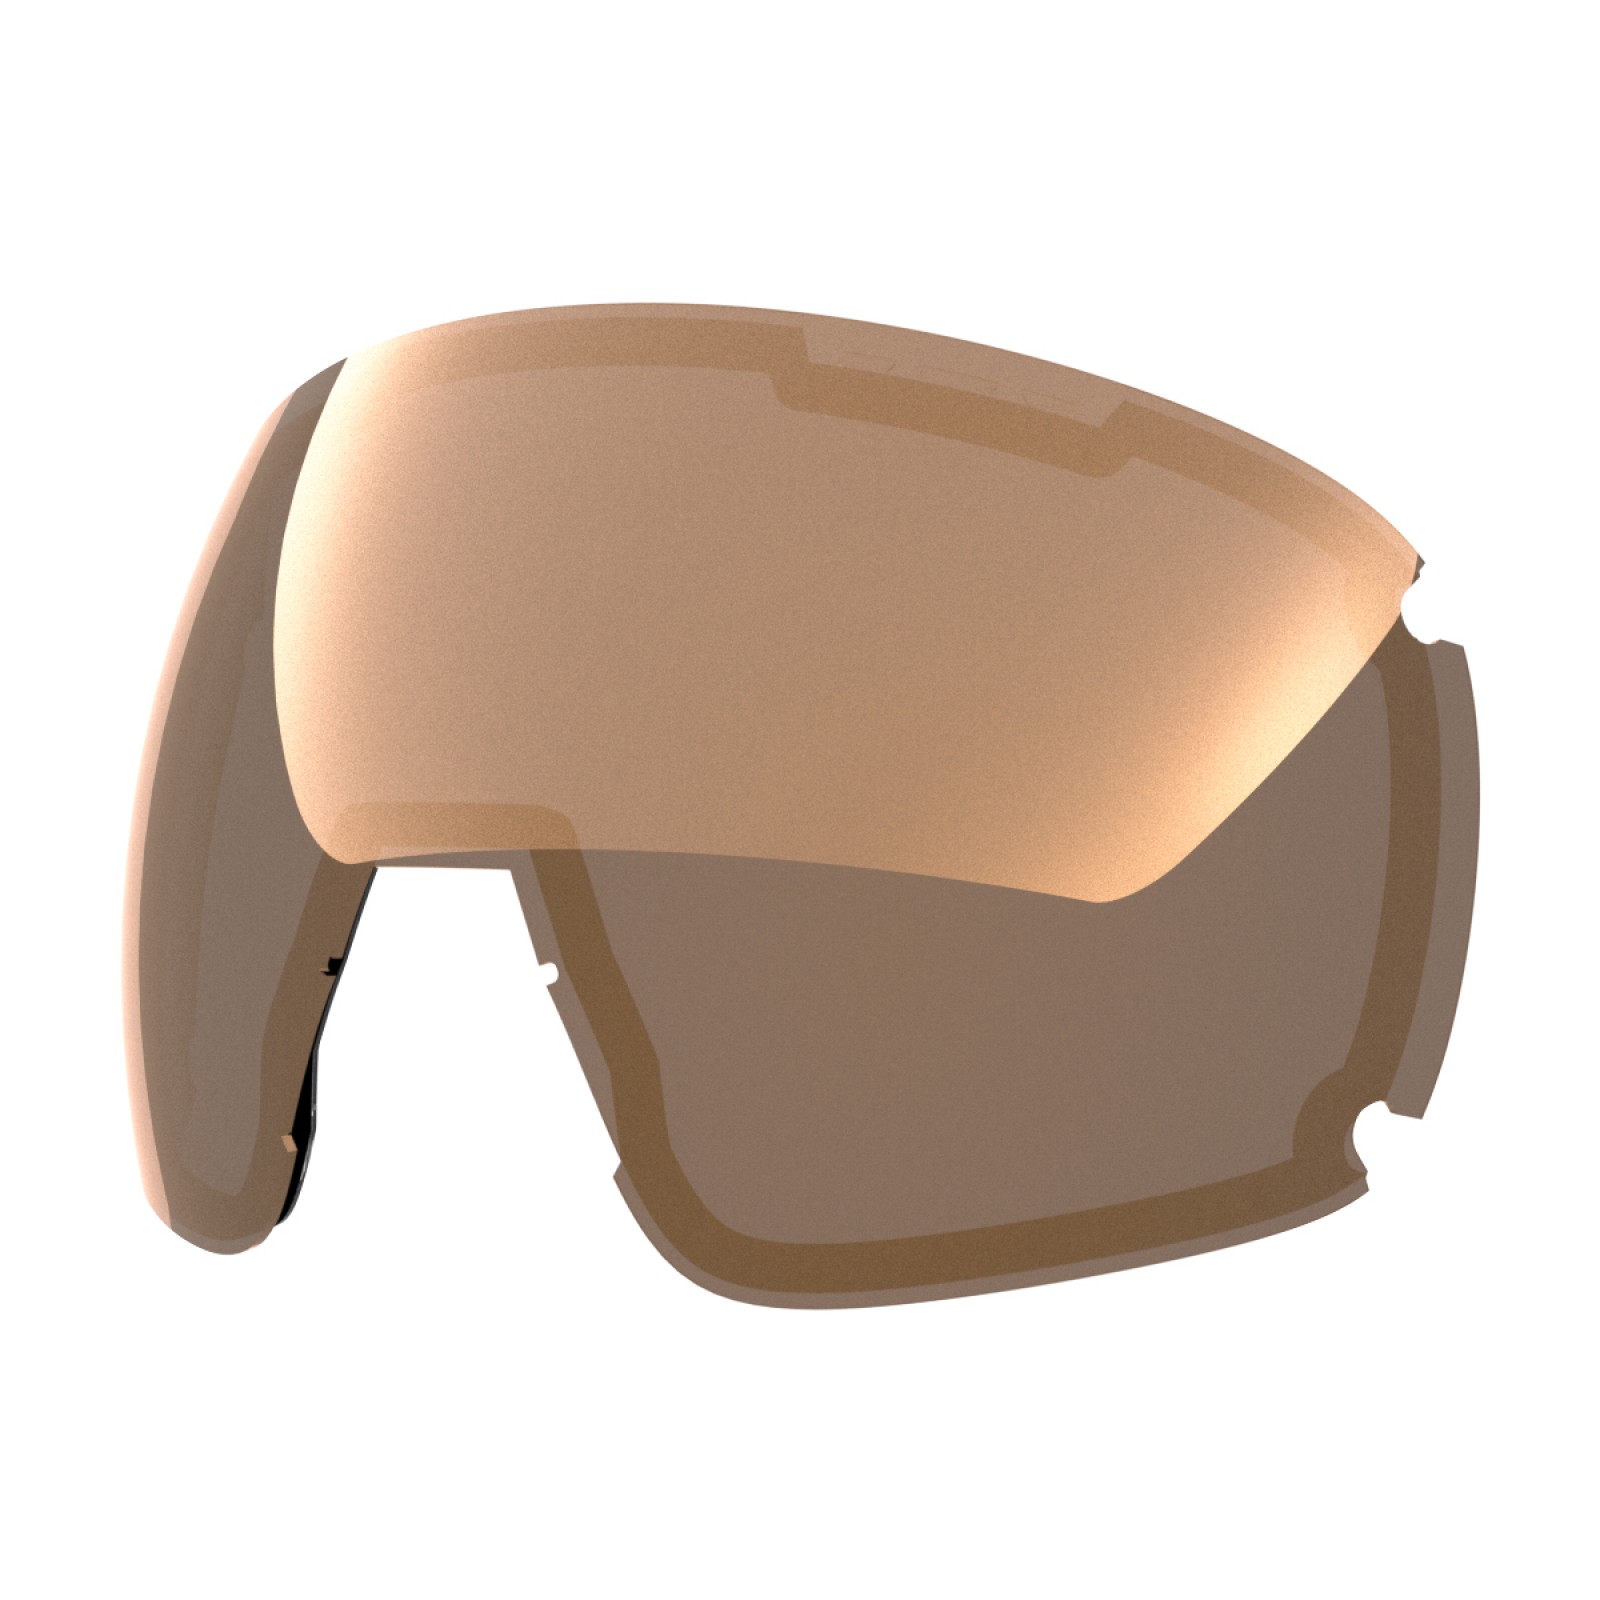 GOLD24 MCI LENS FOR EARTH SNOW GOGGLE